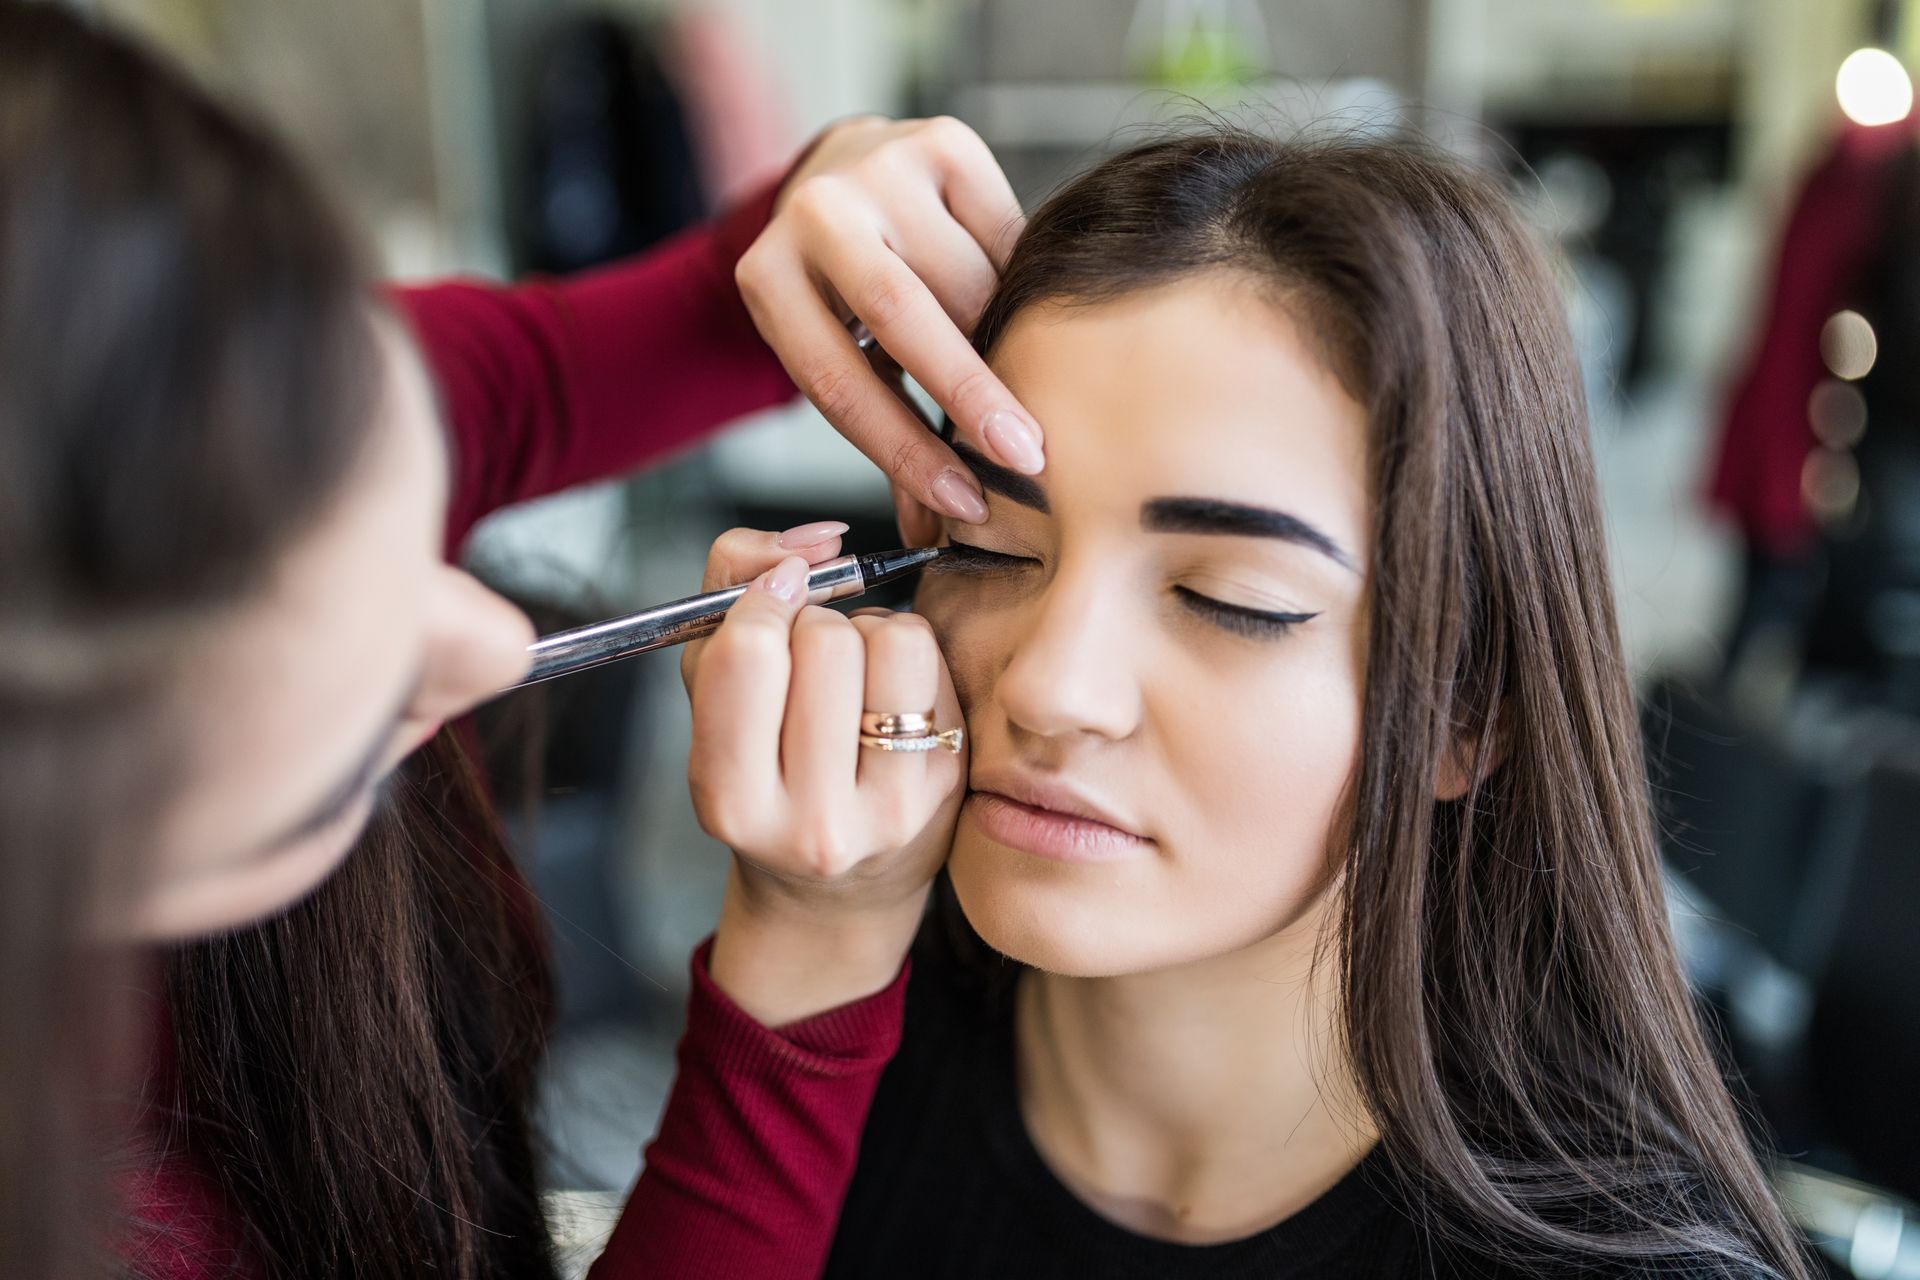 a woman is applying eyeliner to another woman 's eye